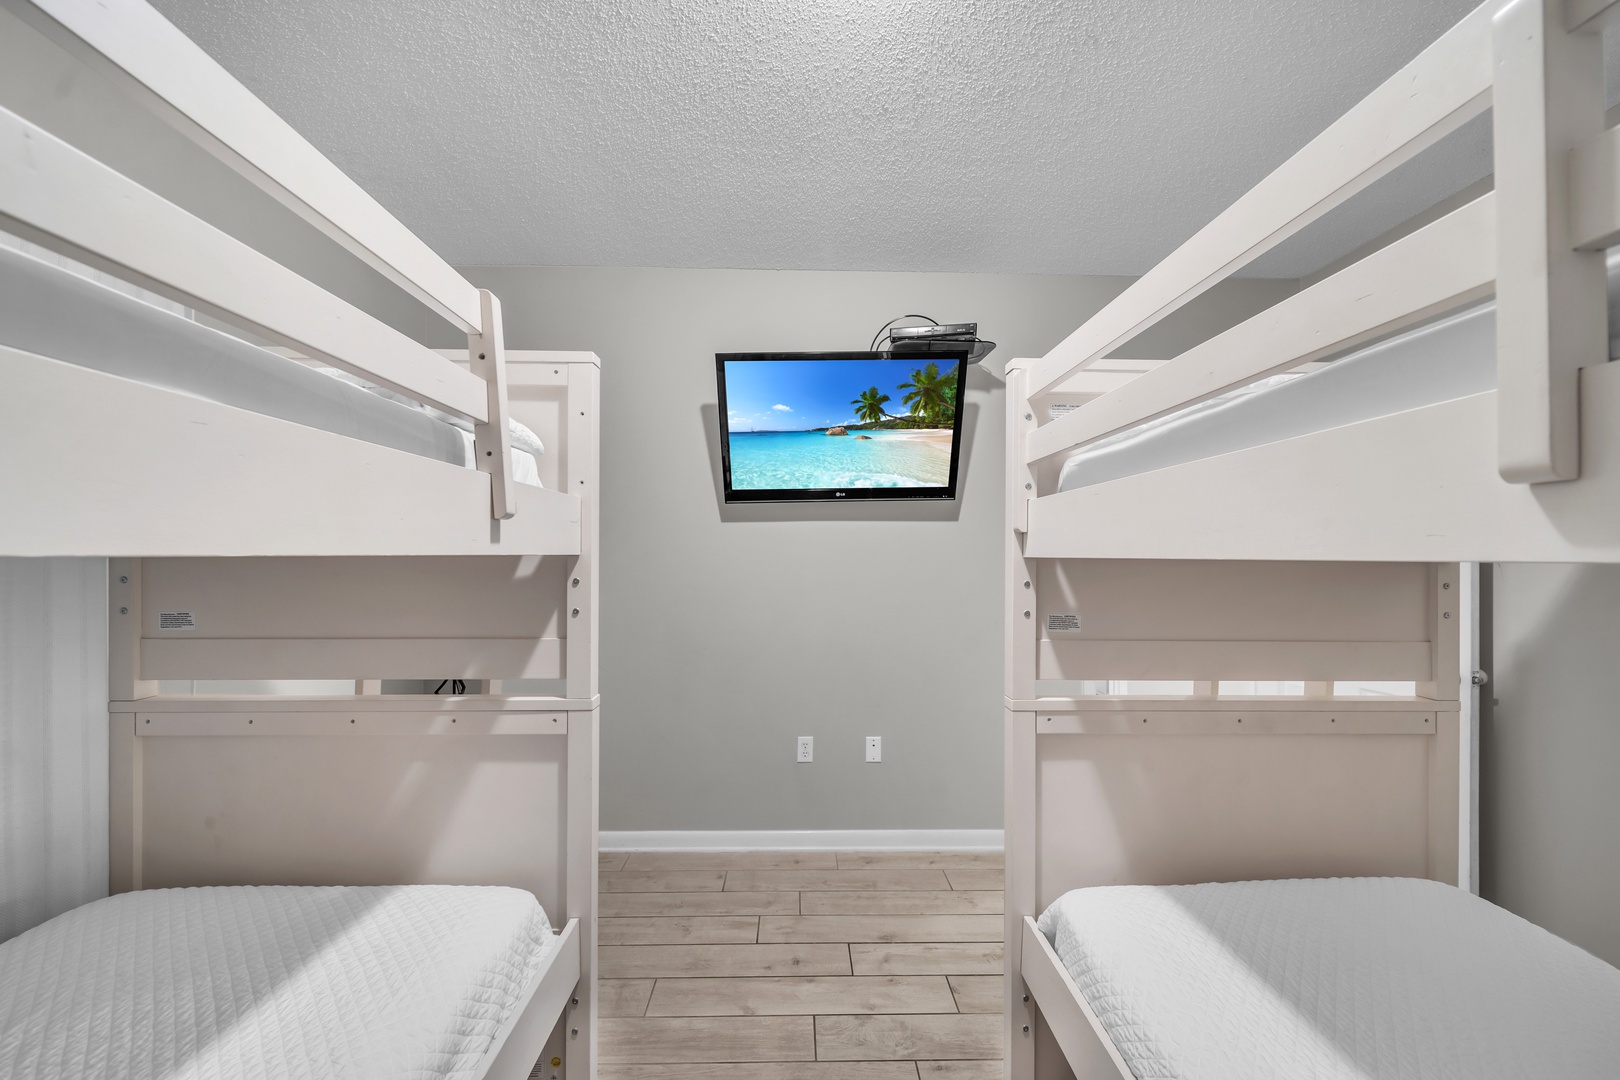 The second Guest Bedroom, a haven for the younger ones, features two sets of Bunk Beds with twin-size mattresses, accommodating an additional 4 people. This room also boasts a Large Flat-Screen HD TV and a DVD player